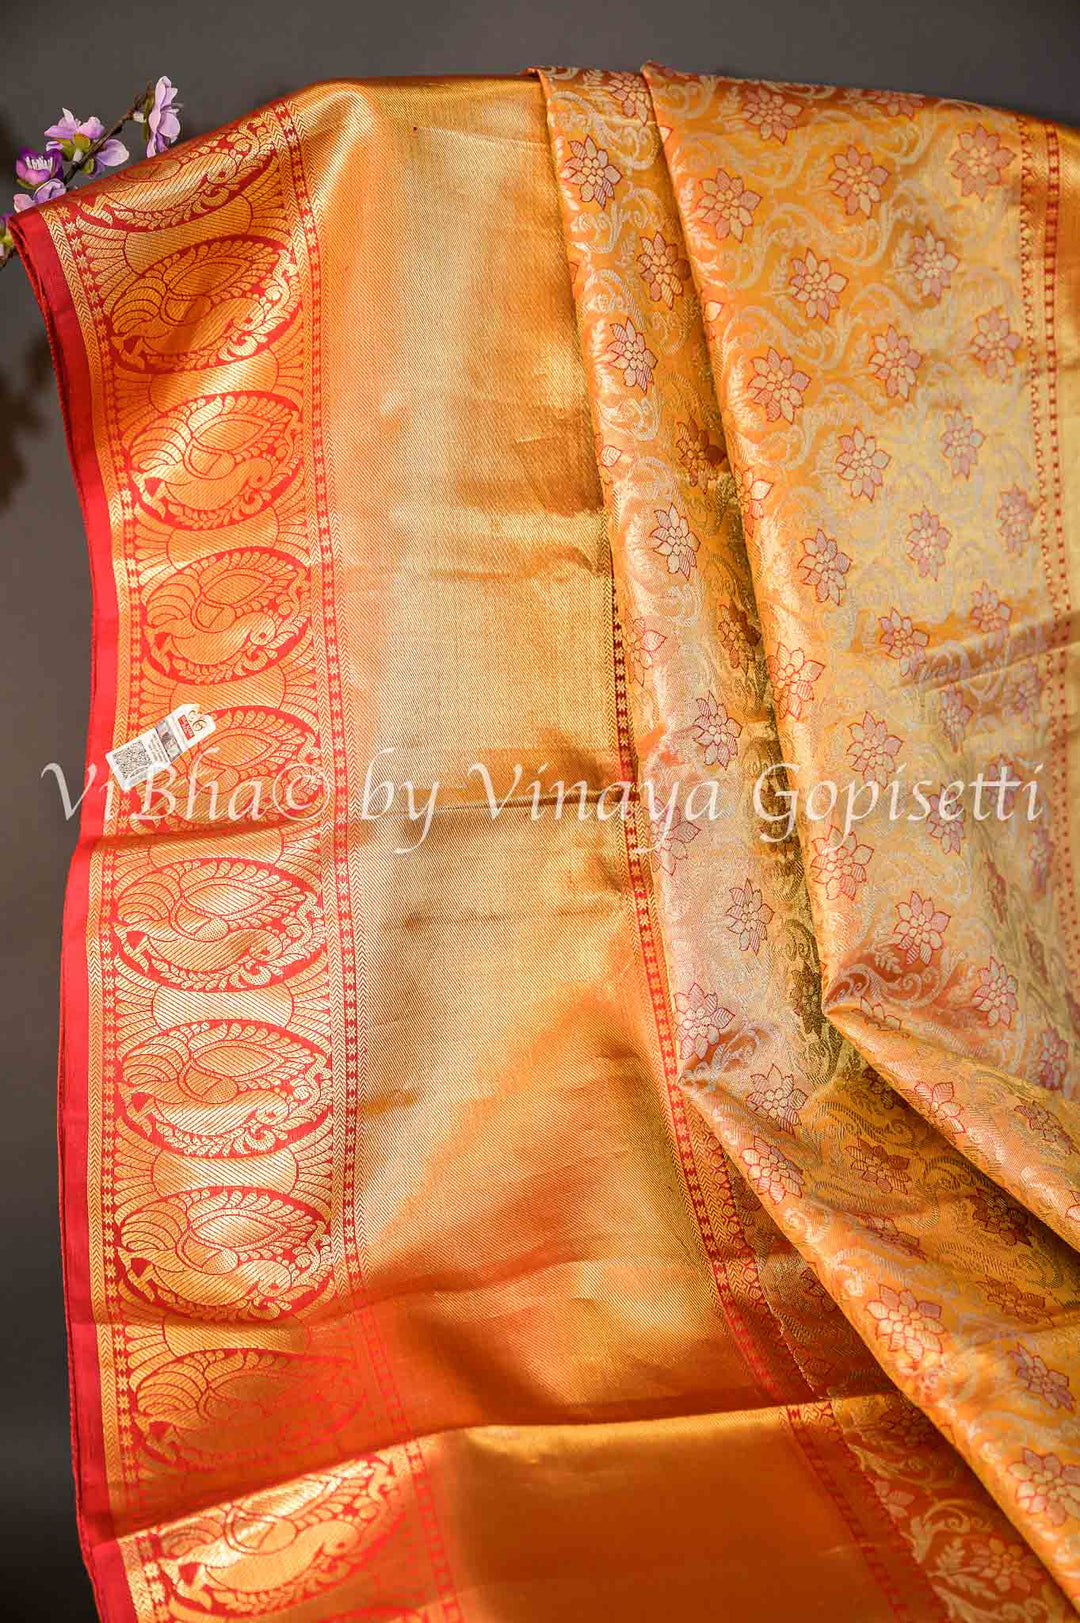 Sarees - Gold Tissue All Over Design With Red Borders Kanchi Silk Saree